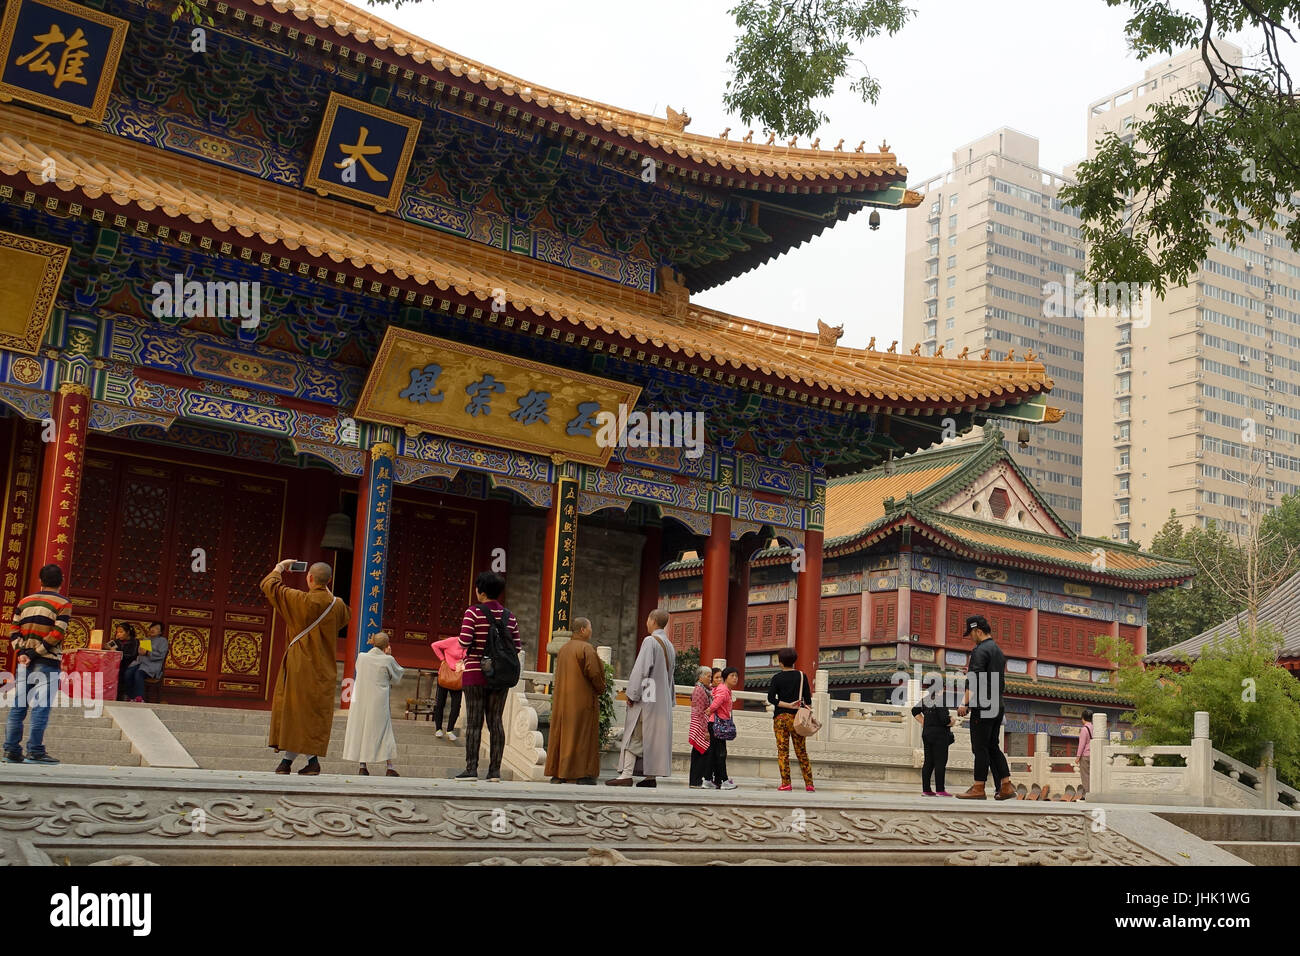 Xi'an, China - 2015, 18 October: Monks photographing inner city budhist temple. Stock Photo